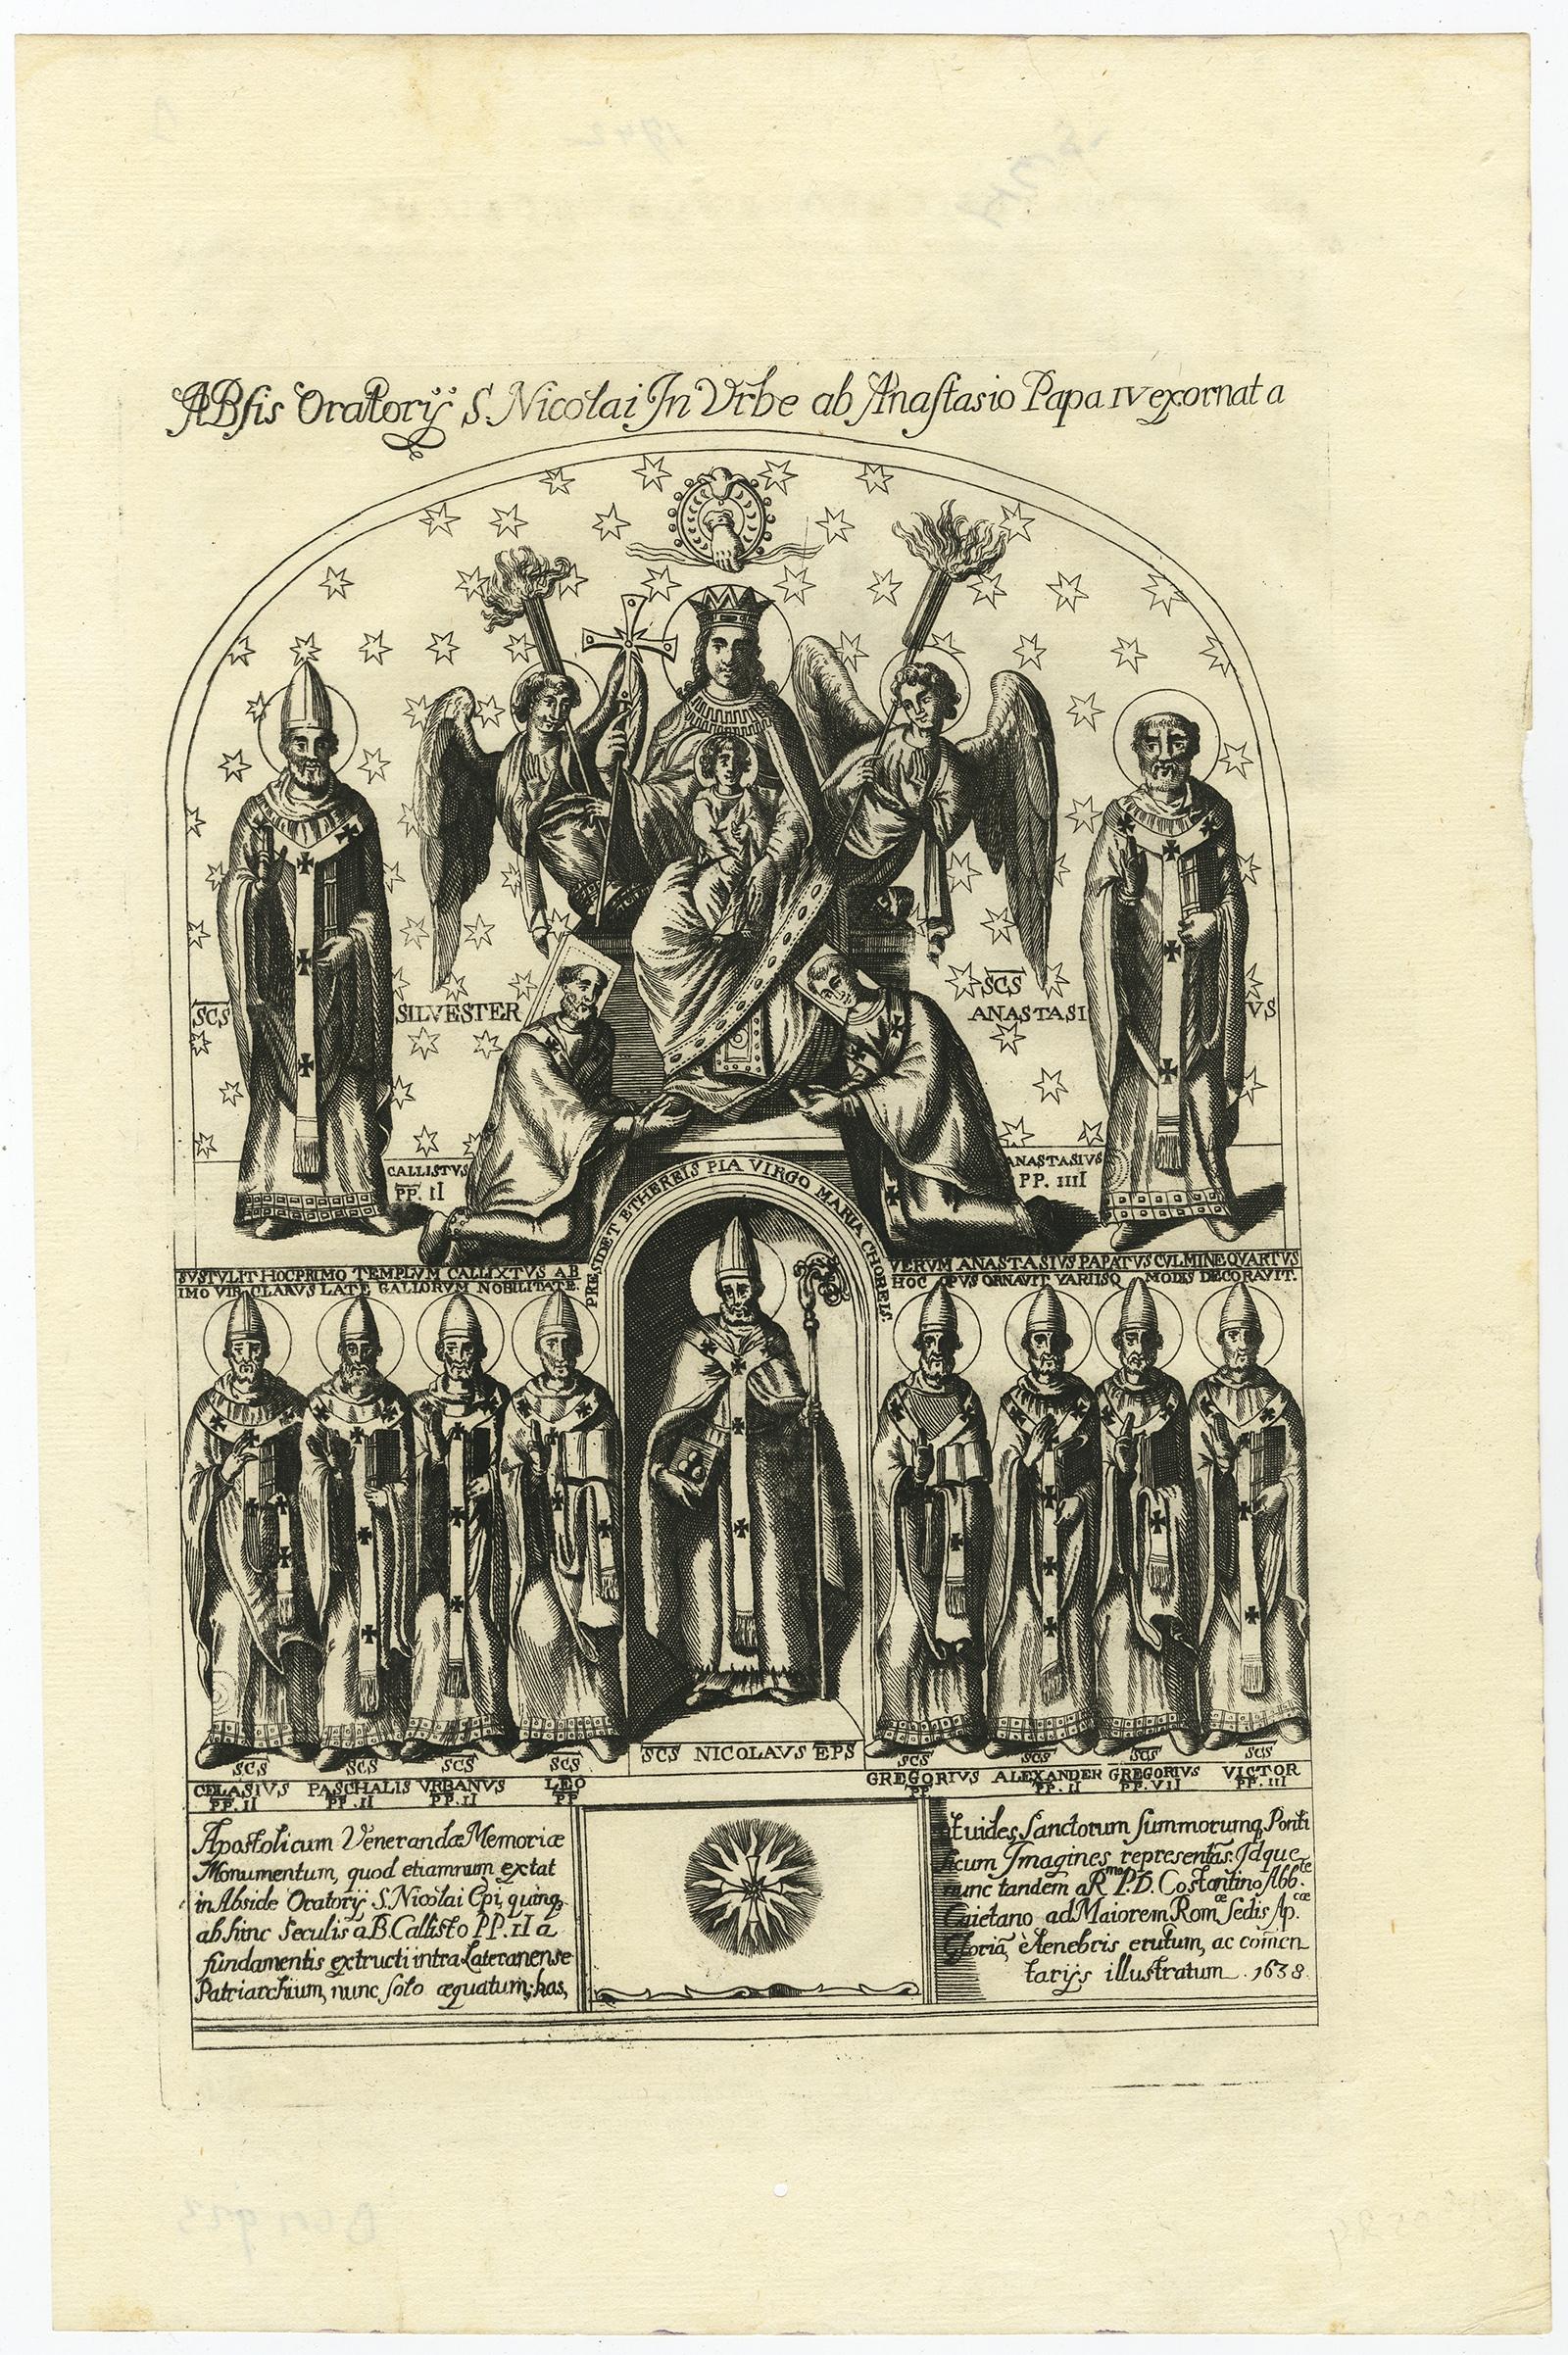 Antique print, titled: 'Absis Oratory S. Nicolai In Urbe ab Anastasio (…)' - This plate shows Roman Bishops; Silvester, Anastasius, St. Nicholas, Paschal, Gregorius etc.

Rhetoric Oratory is the art of using language, such as public speaking, for